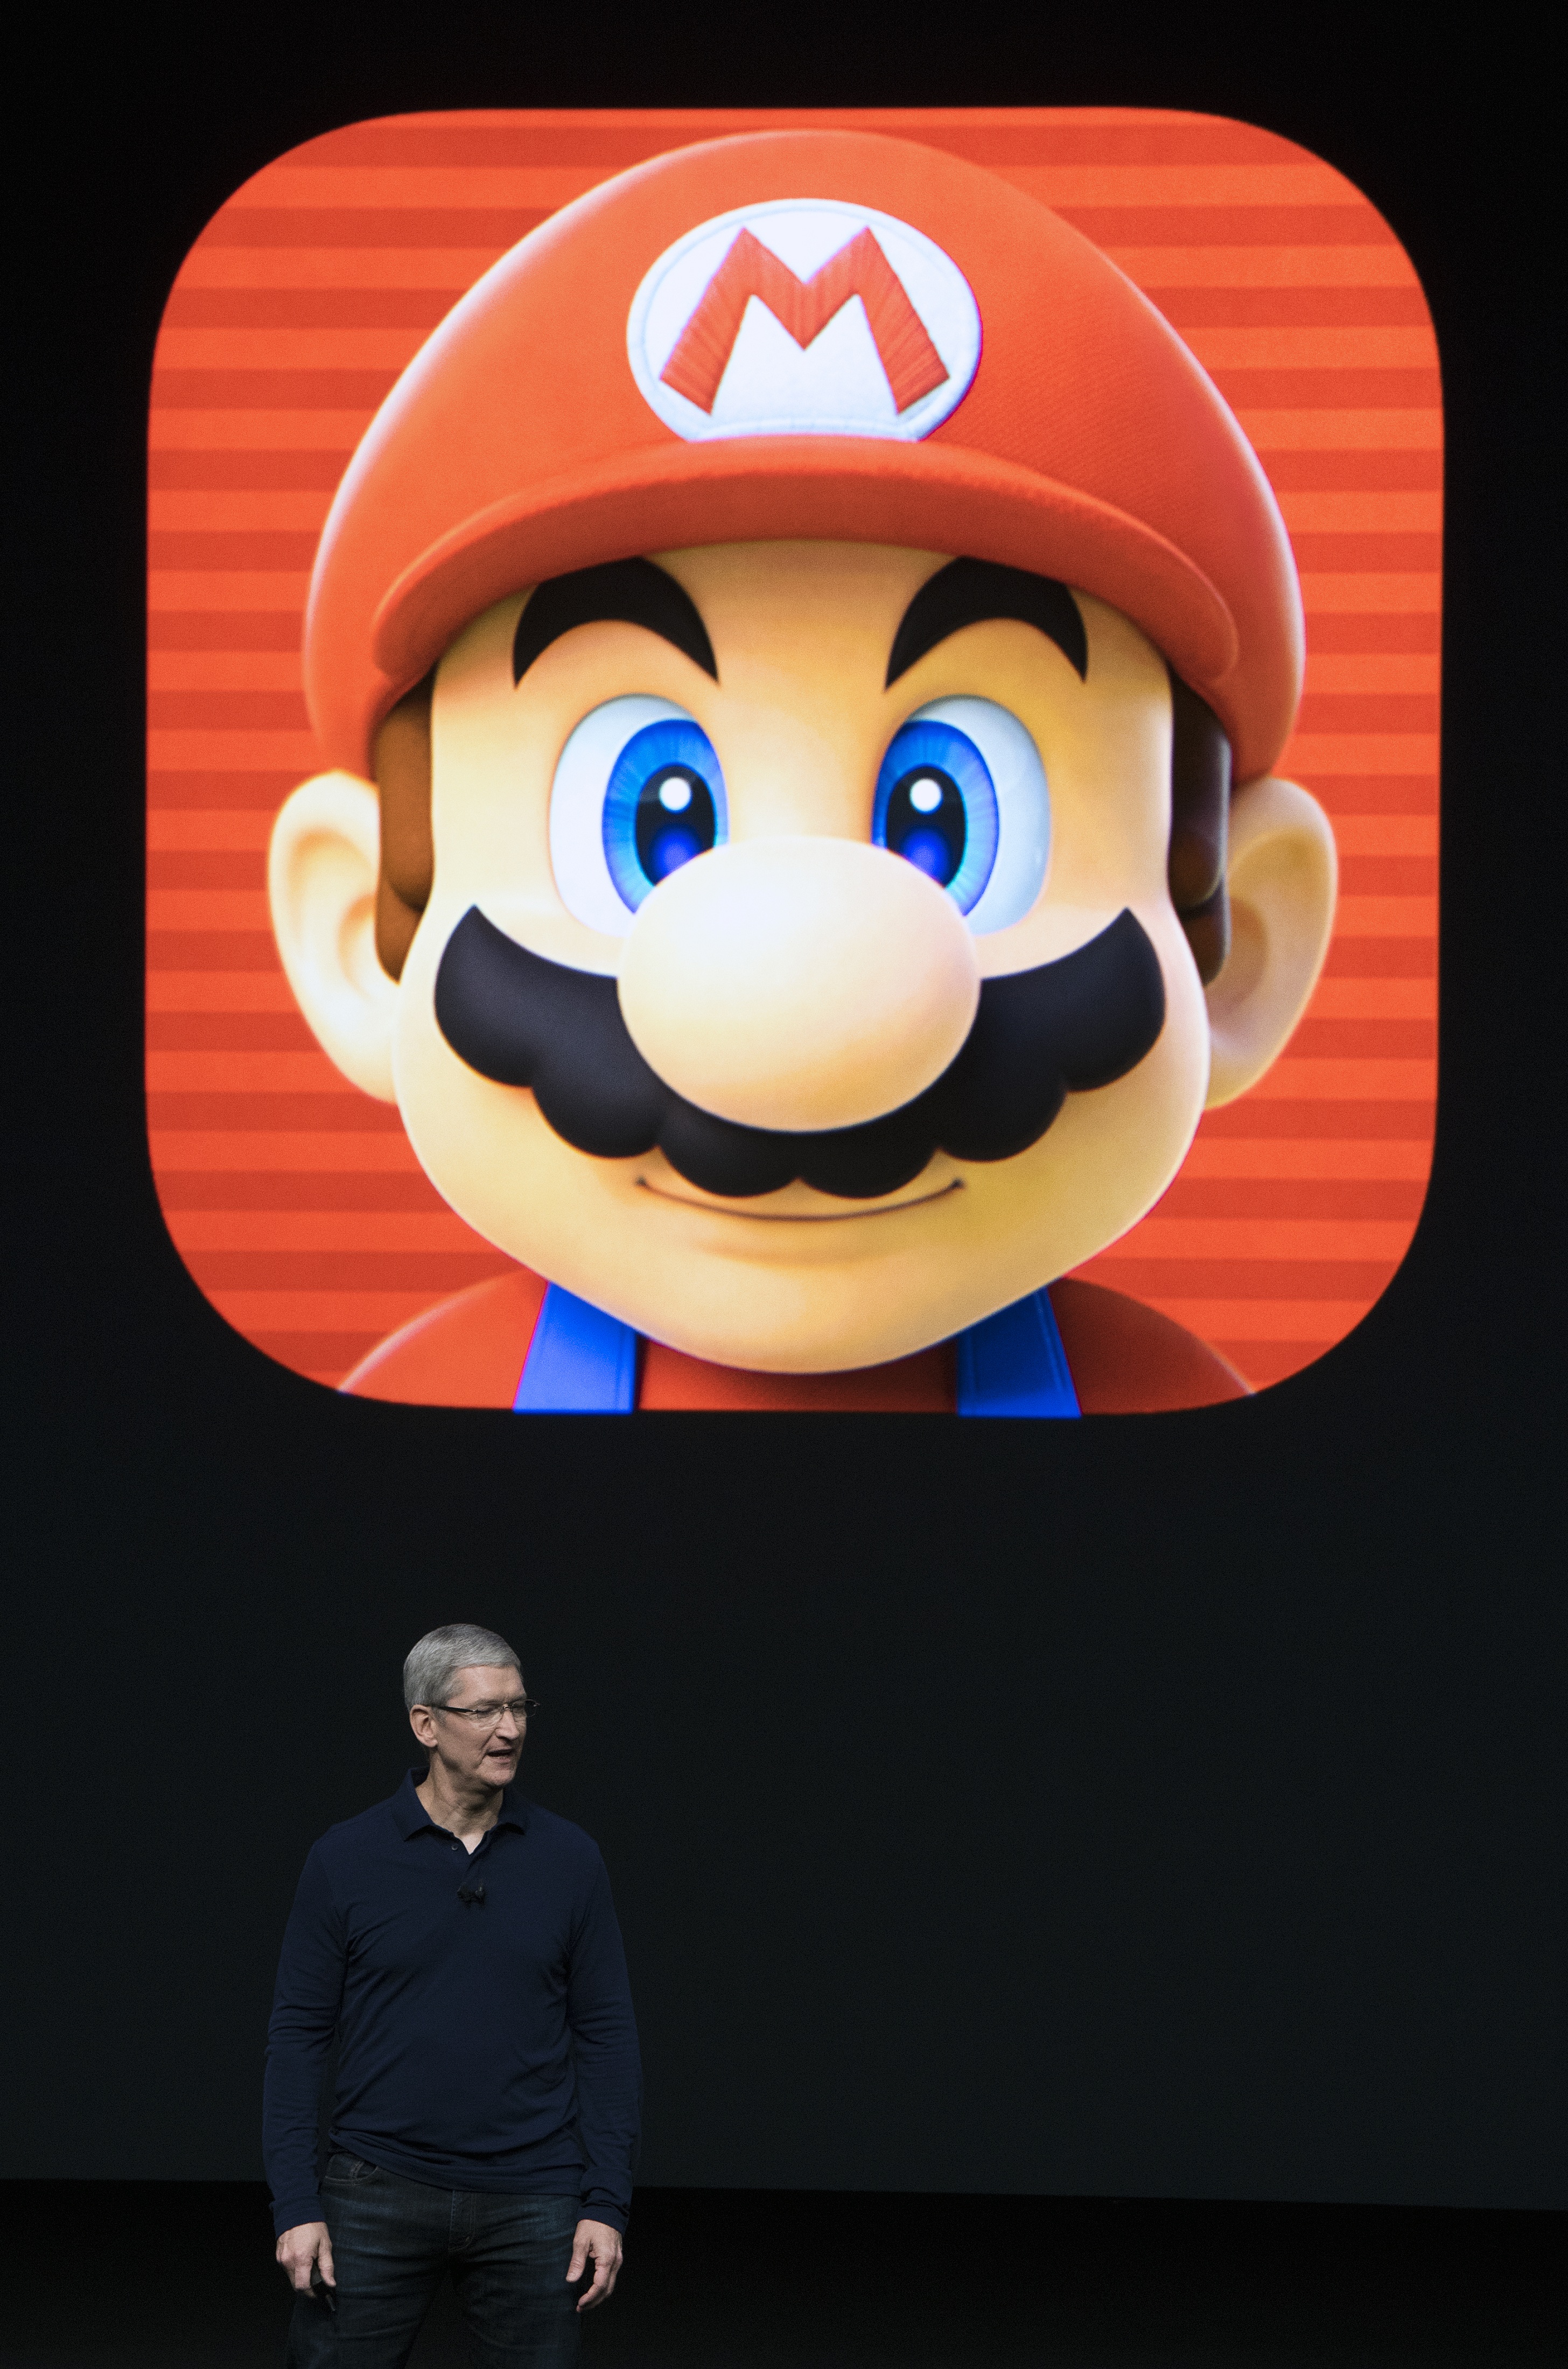 Apple CEO Tim Cook introduces a Super Mario game during an Apple event inside Bill Graham Civic Auditorium in San Francisco, California on September 07, 2016.   Apple is expected to introduce a new iPhone and perhaps a second-generation smartwatch as it polishes its lineup of devices to shine during the year-end shopping season. The rumor mill has been grinding away with talk of iPhone 7 models that will boast faster chips, more sophisticated cameras, and improved software while doing away with jacks for plugging in wired headphones.  / AFP PHOTO / Josh Edelson